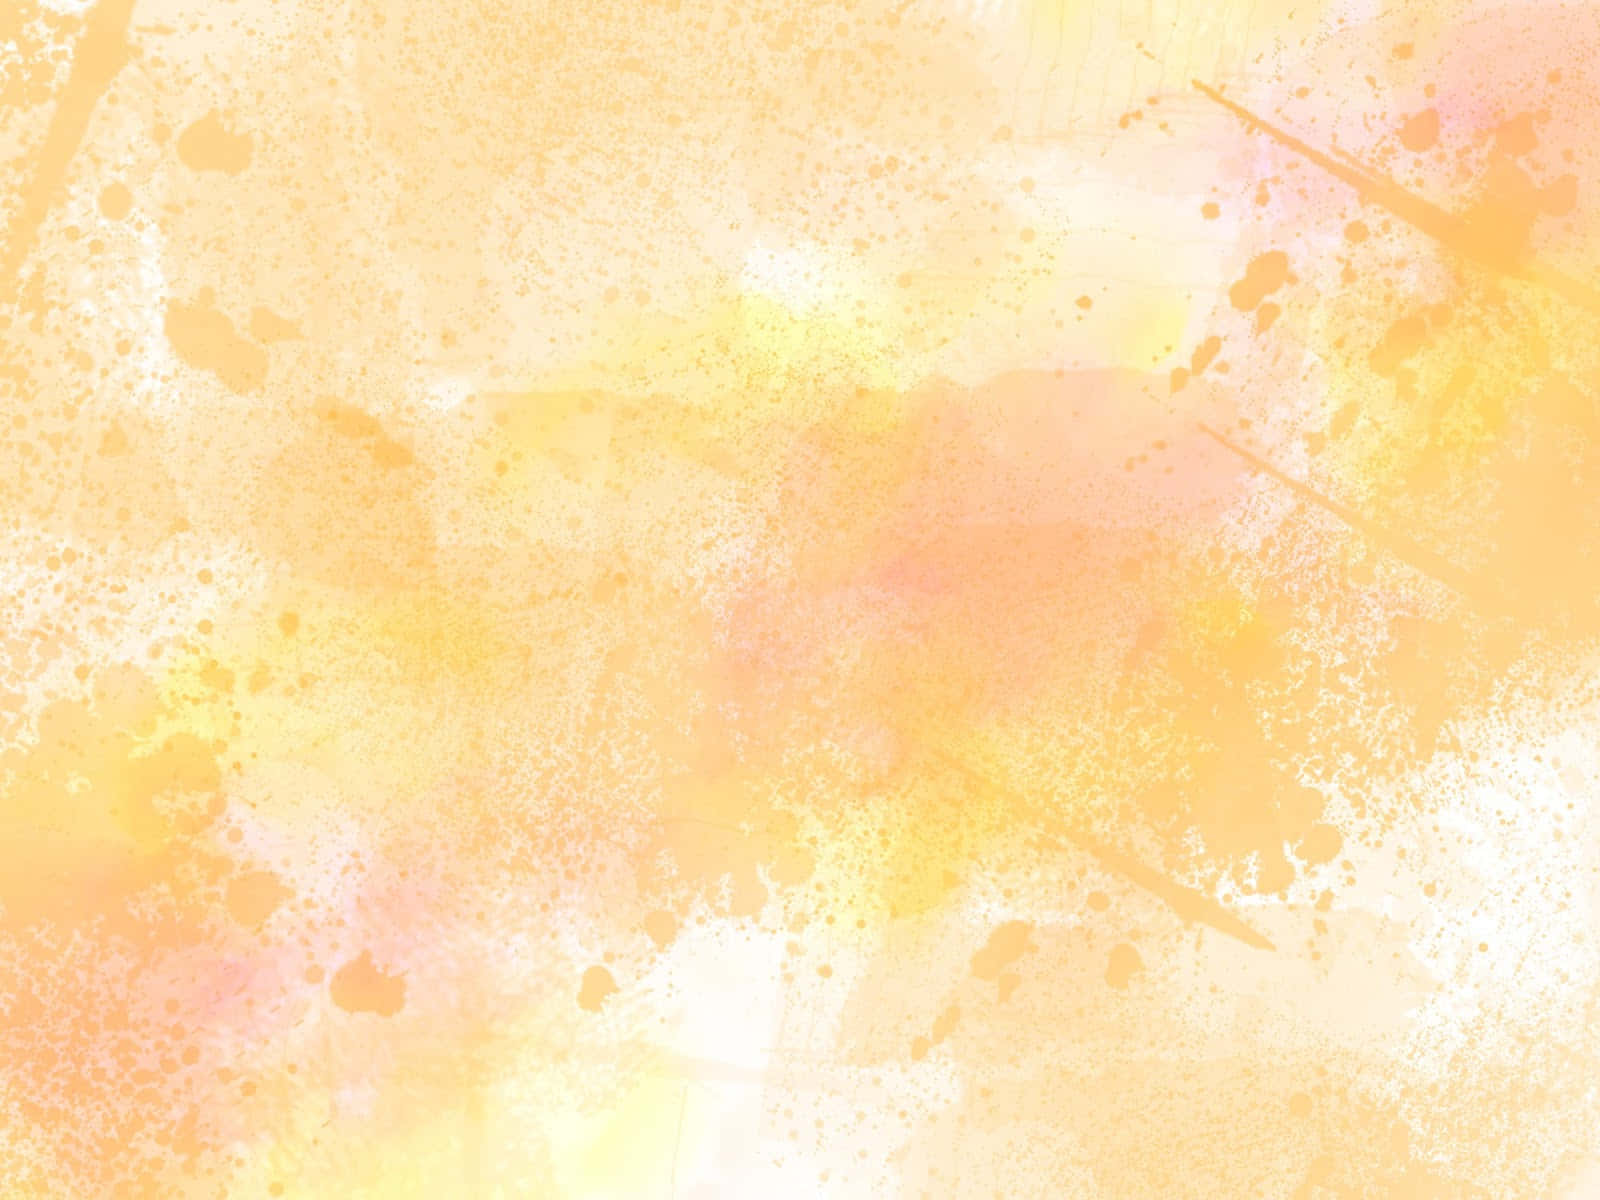 A Watercolor Background With Yellow And Orange Paint Wallpaper